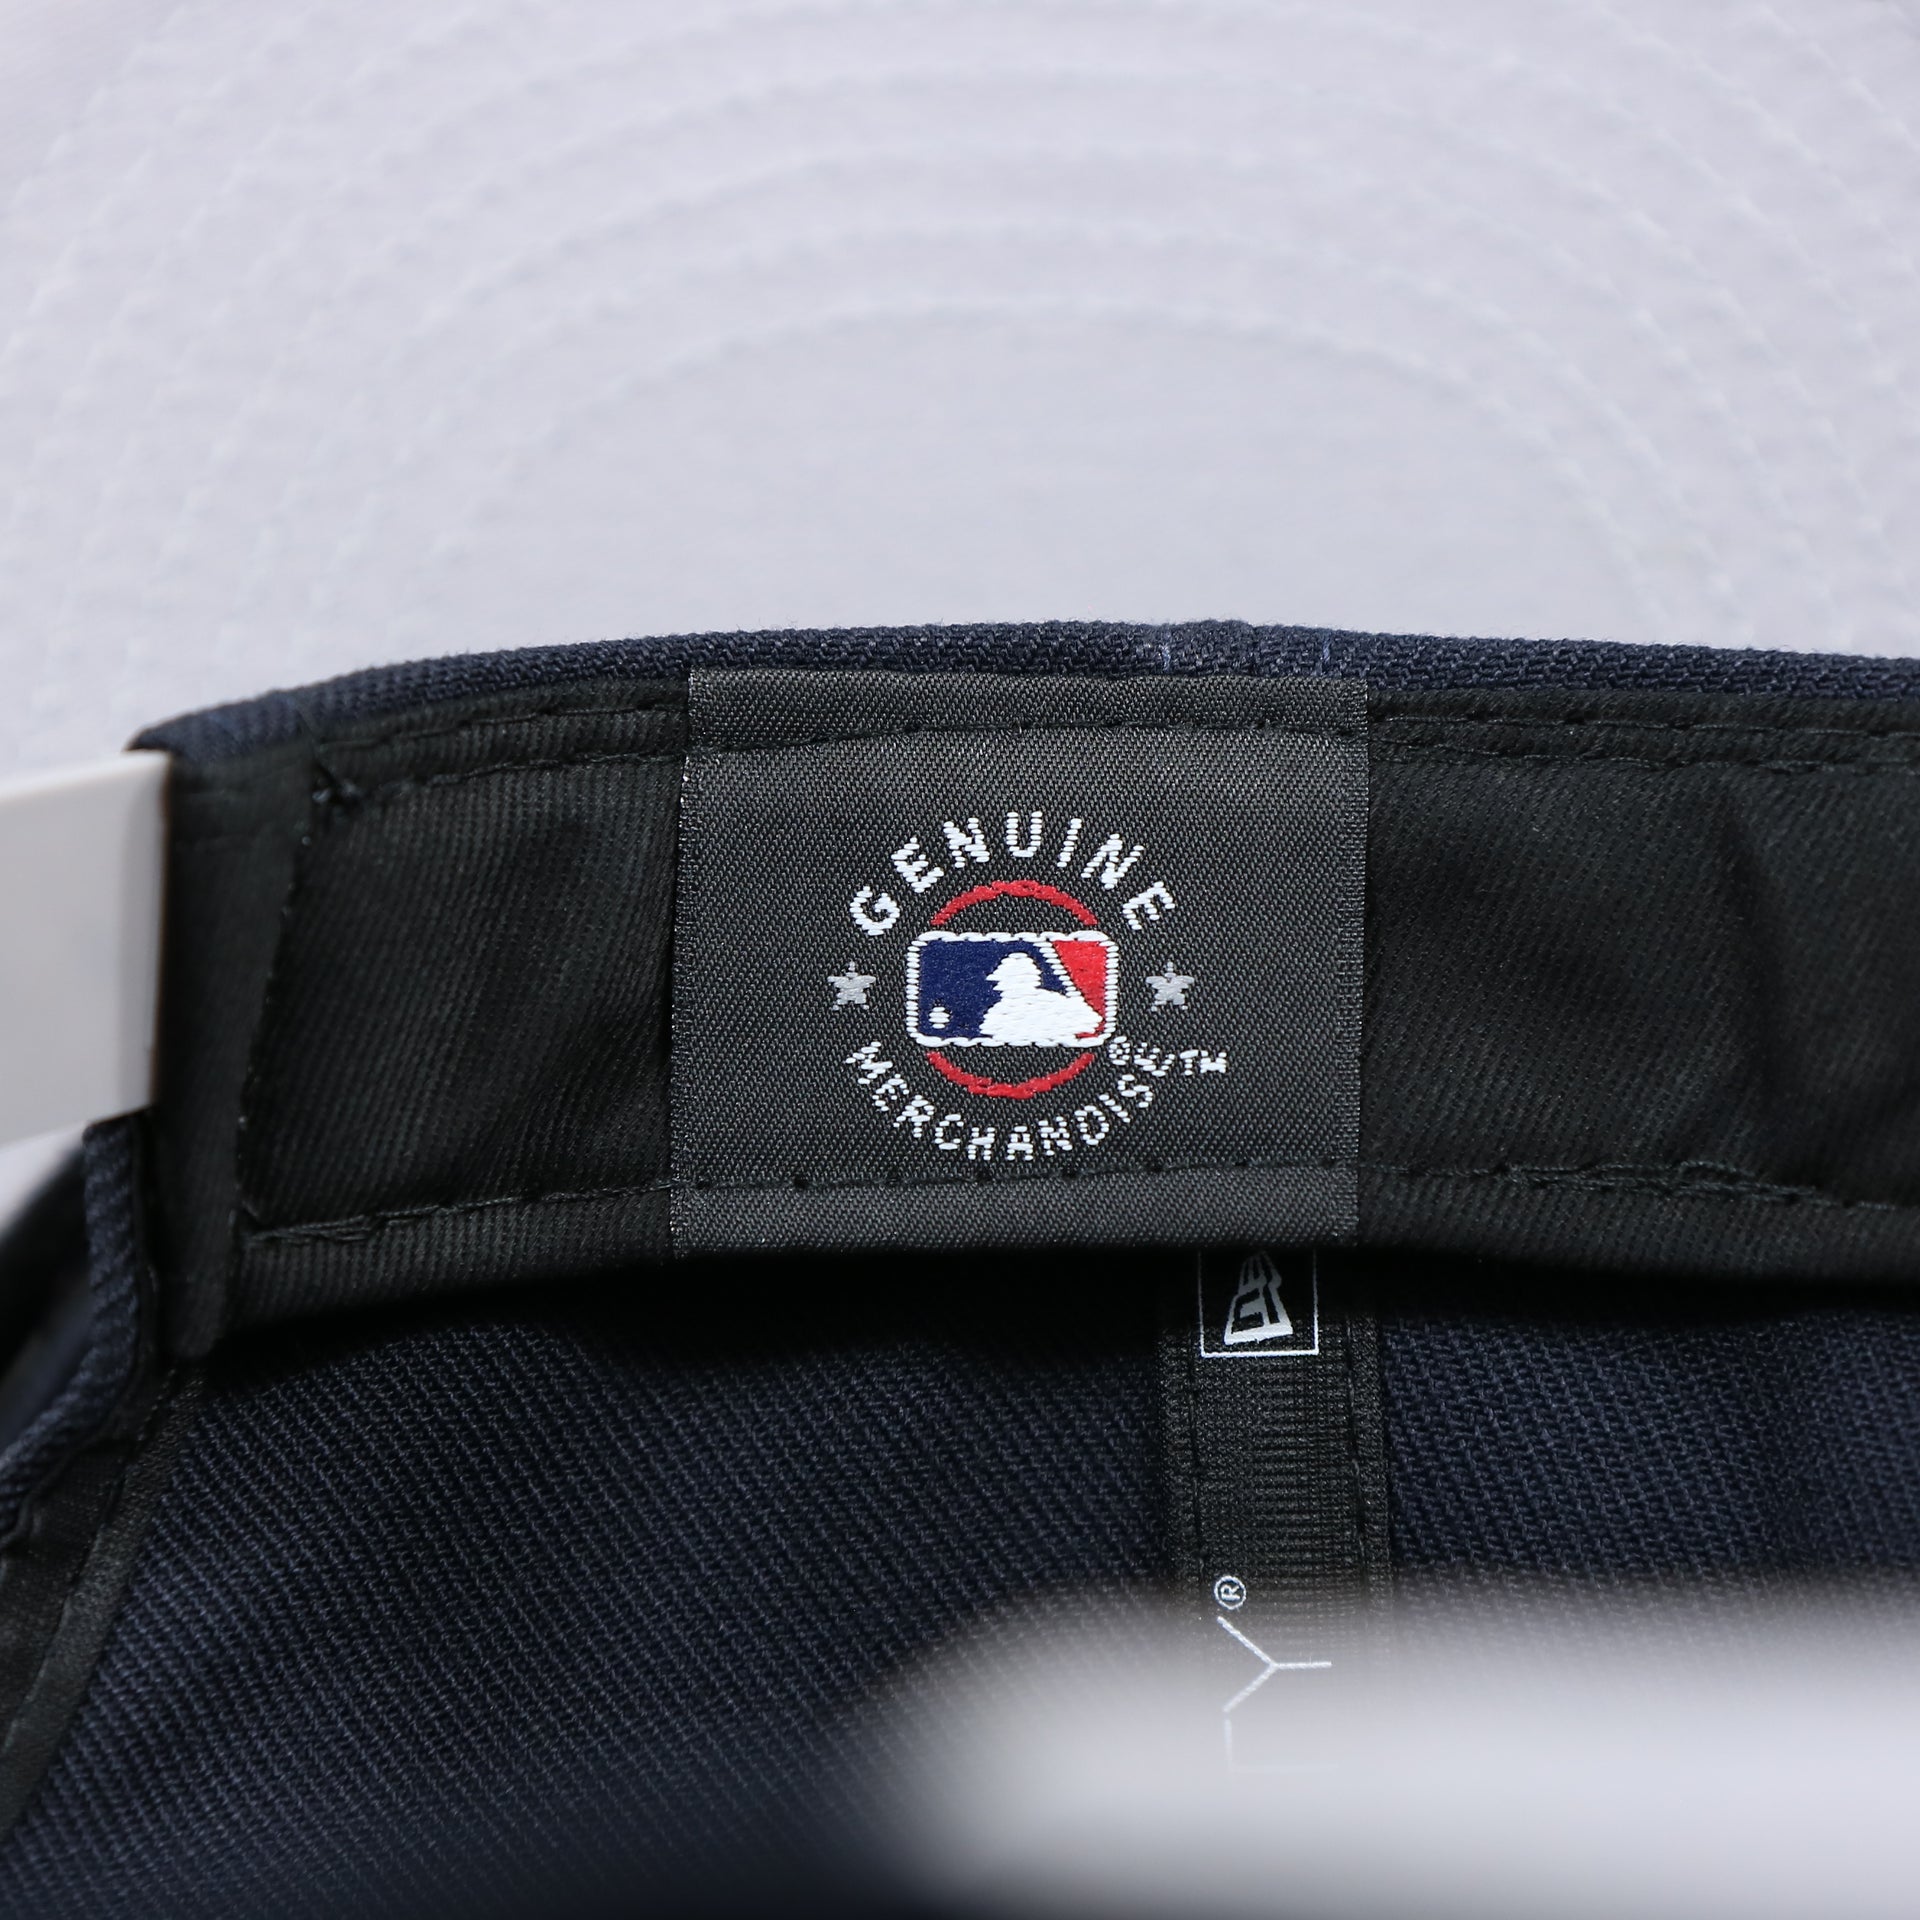 The Genuine Merchandise Tag on the New York Yankees "Team Script" College Bar Style 9Fifty Snapback Hat | Current Logo, Navy/Grey